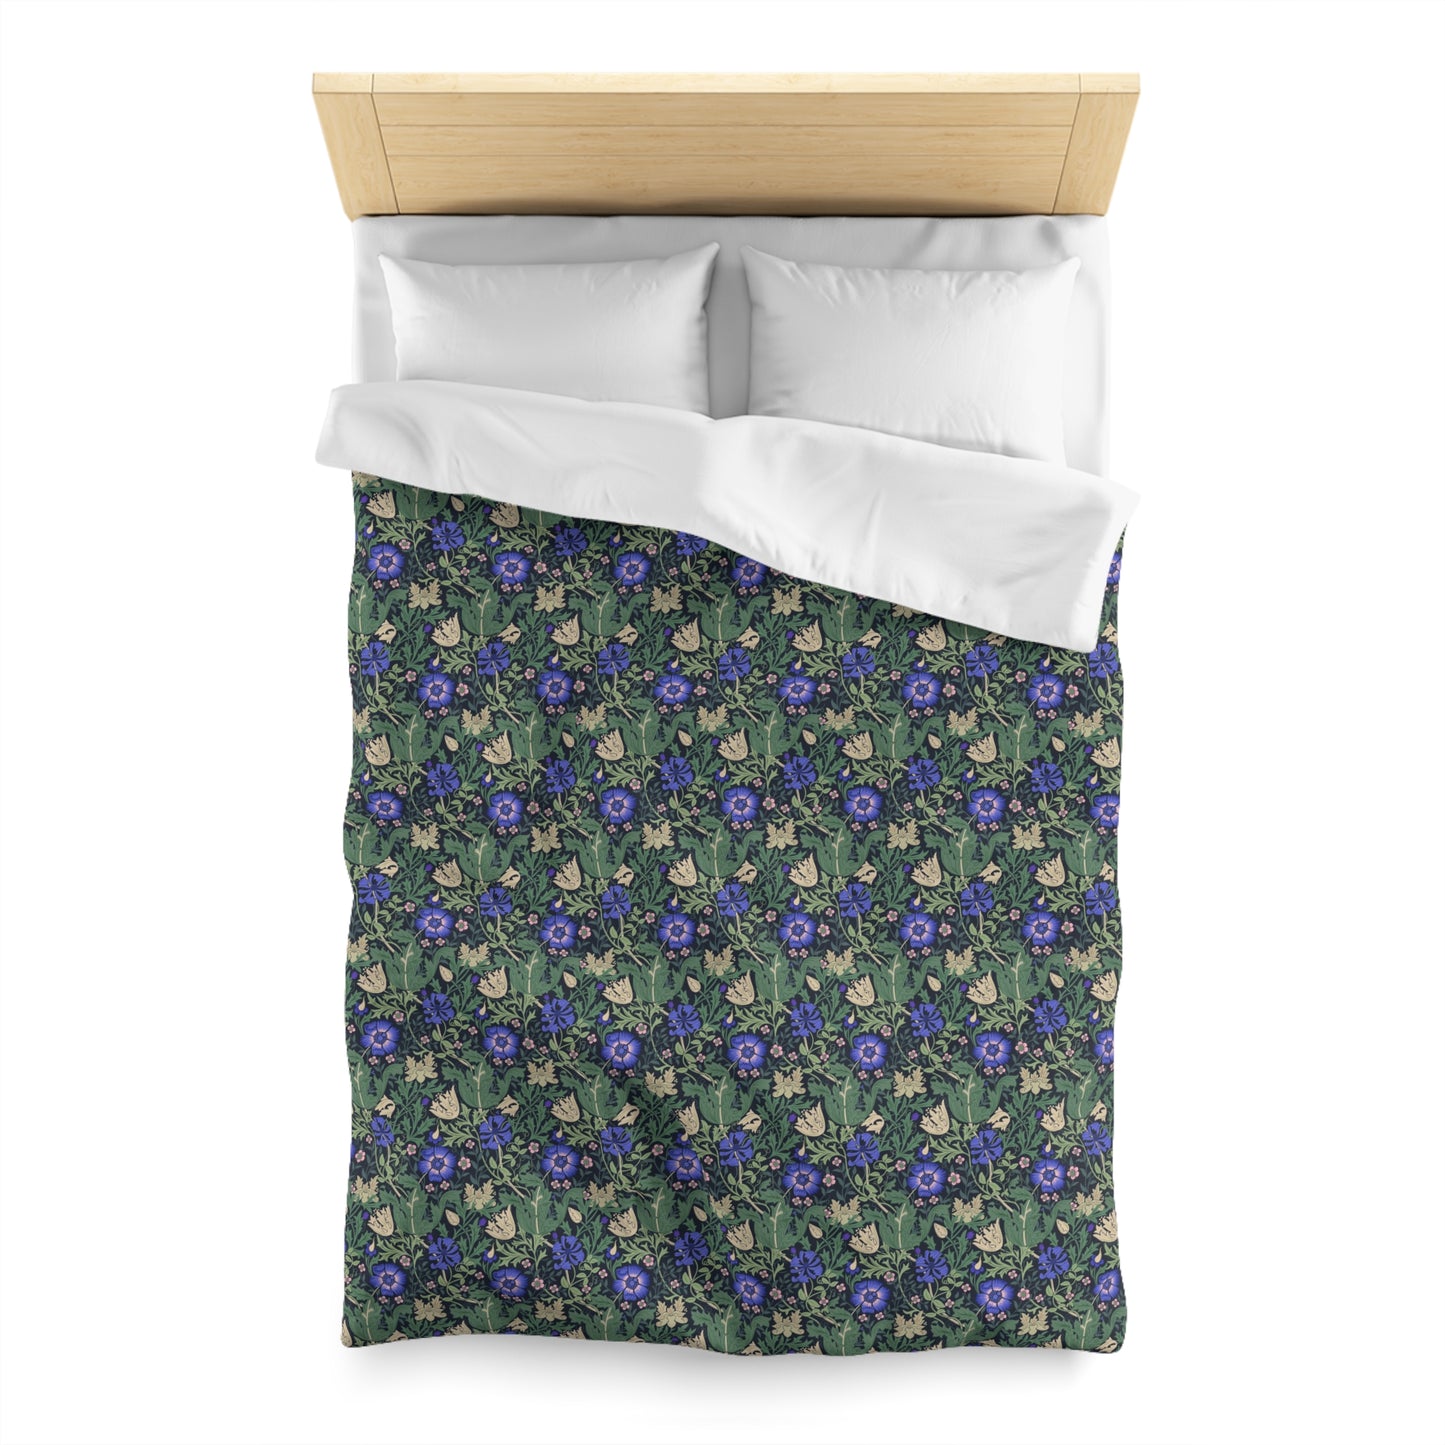 william-morris-co-microfibre-duvet-cover-compton-collection-bluebell-cottage-4